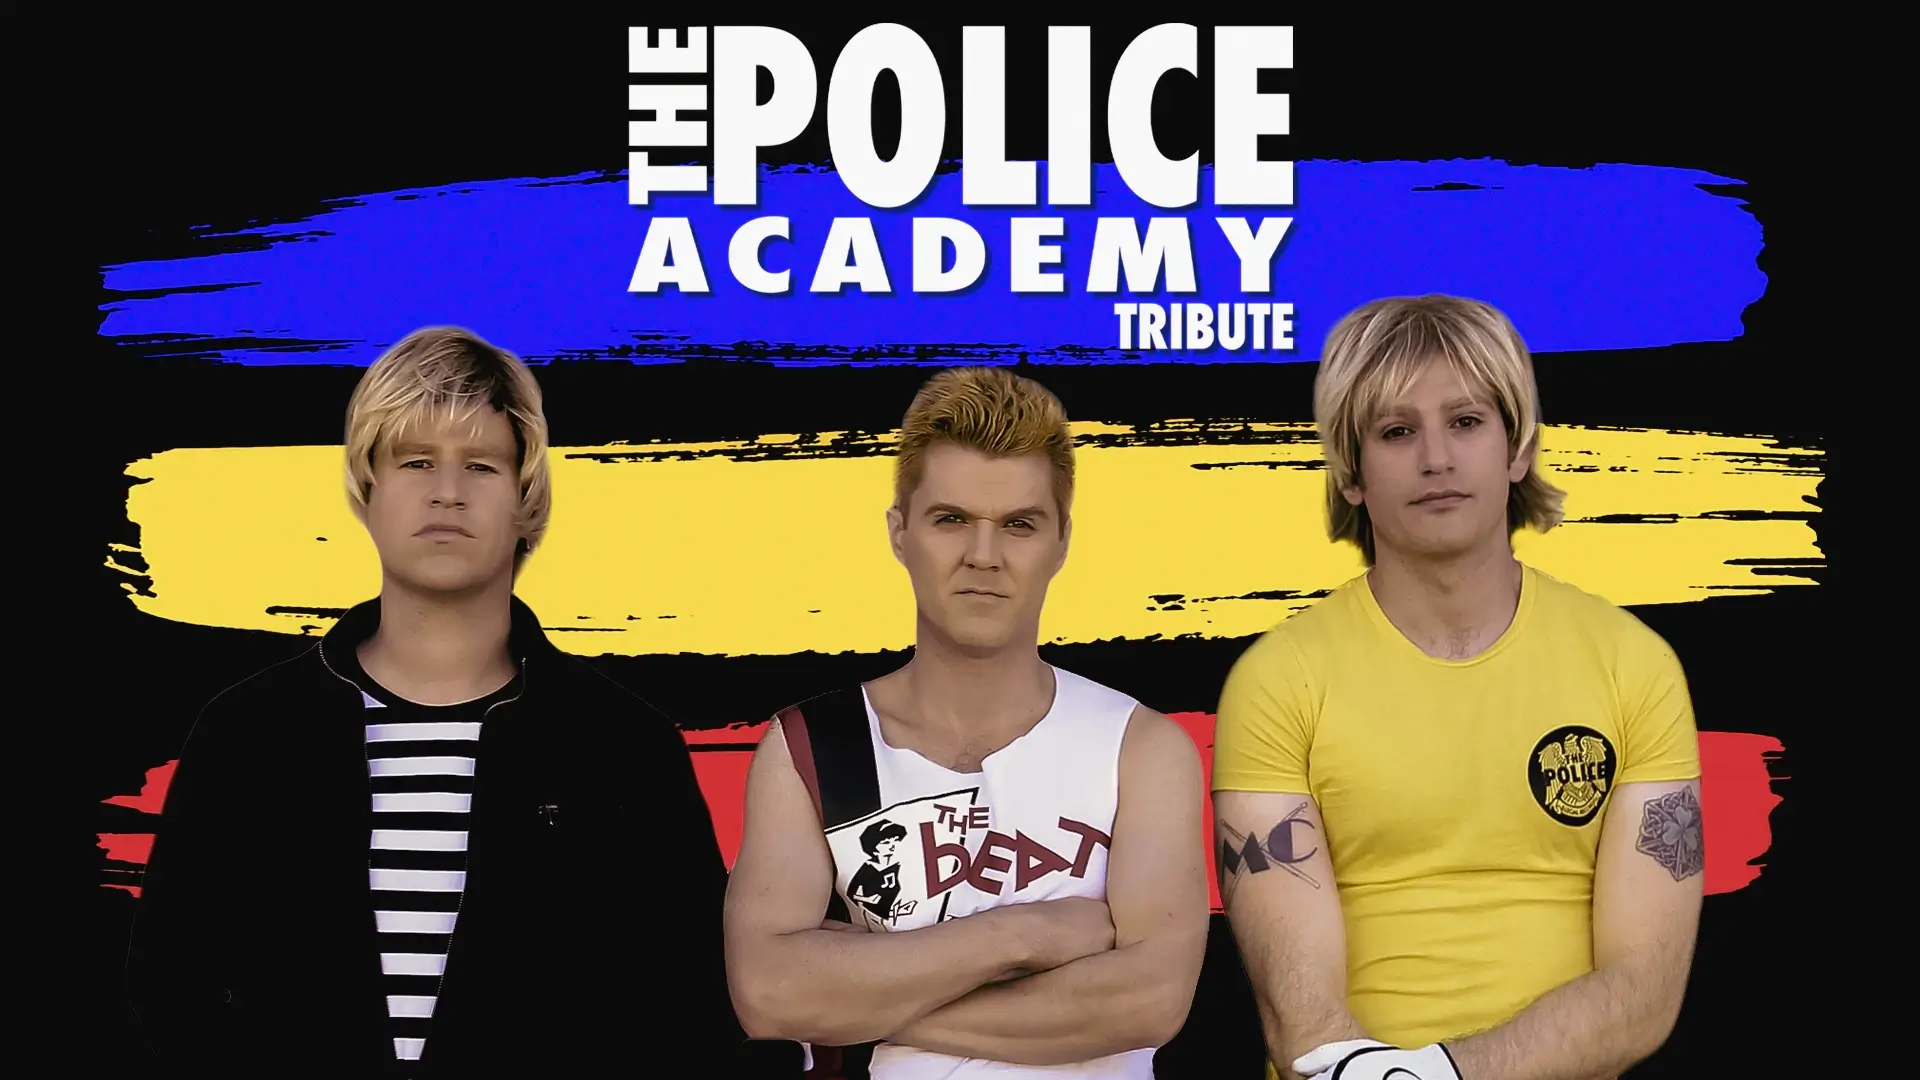 The Police Academy | the Greatest tribute to The Police